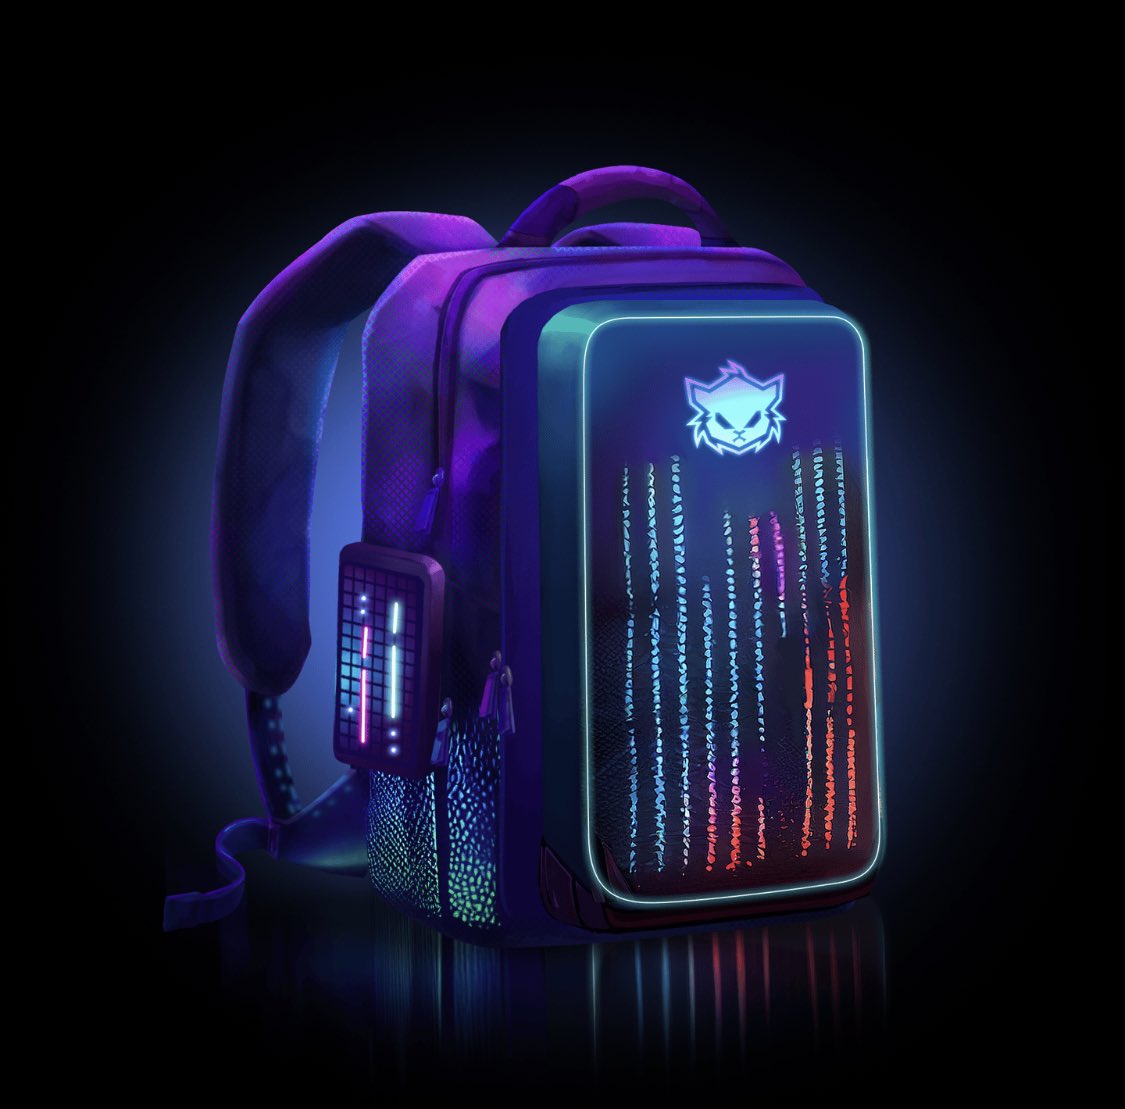 Even doe I have them all, I still feel like the cyber cubs backpack 🎒 looks so much more aesthetically pleasing compared to the rest of them, what do you think #crofam? #loadedlions #ManeCity #cybercubs